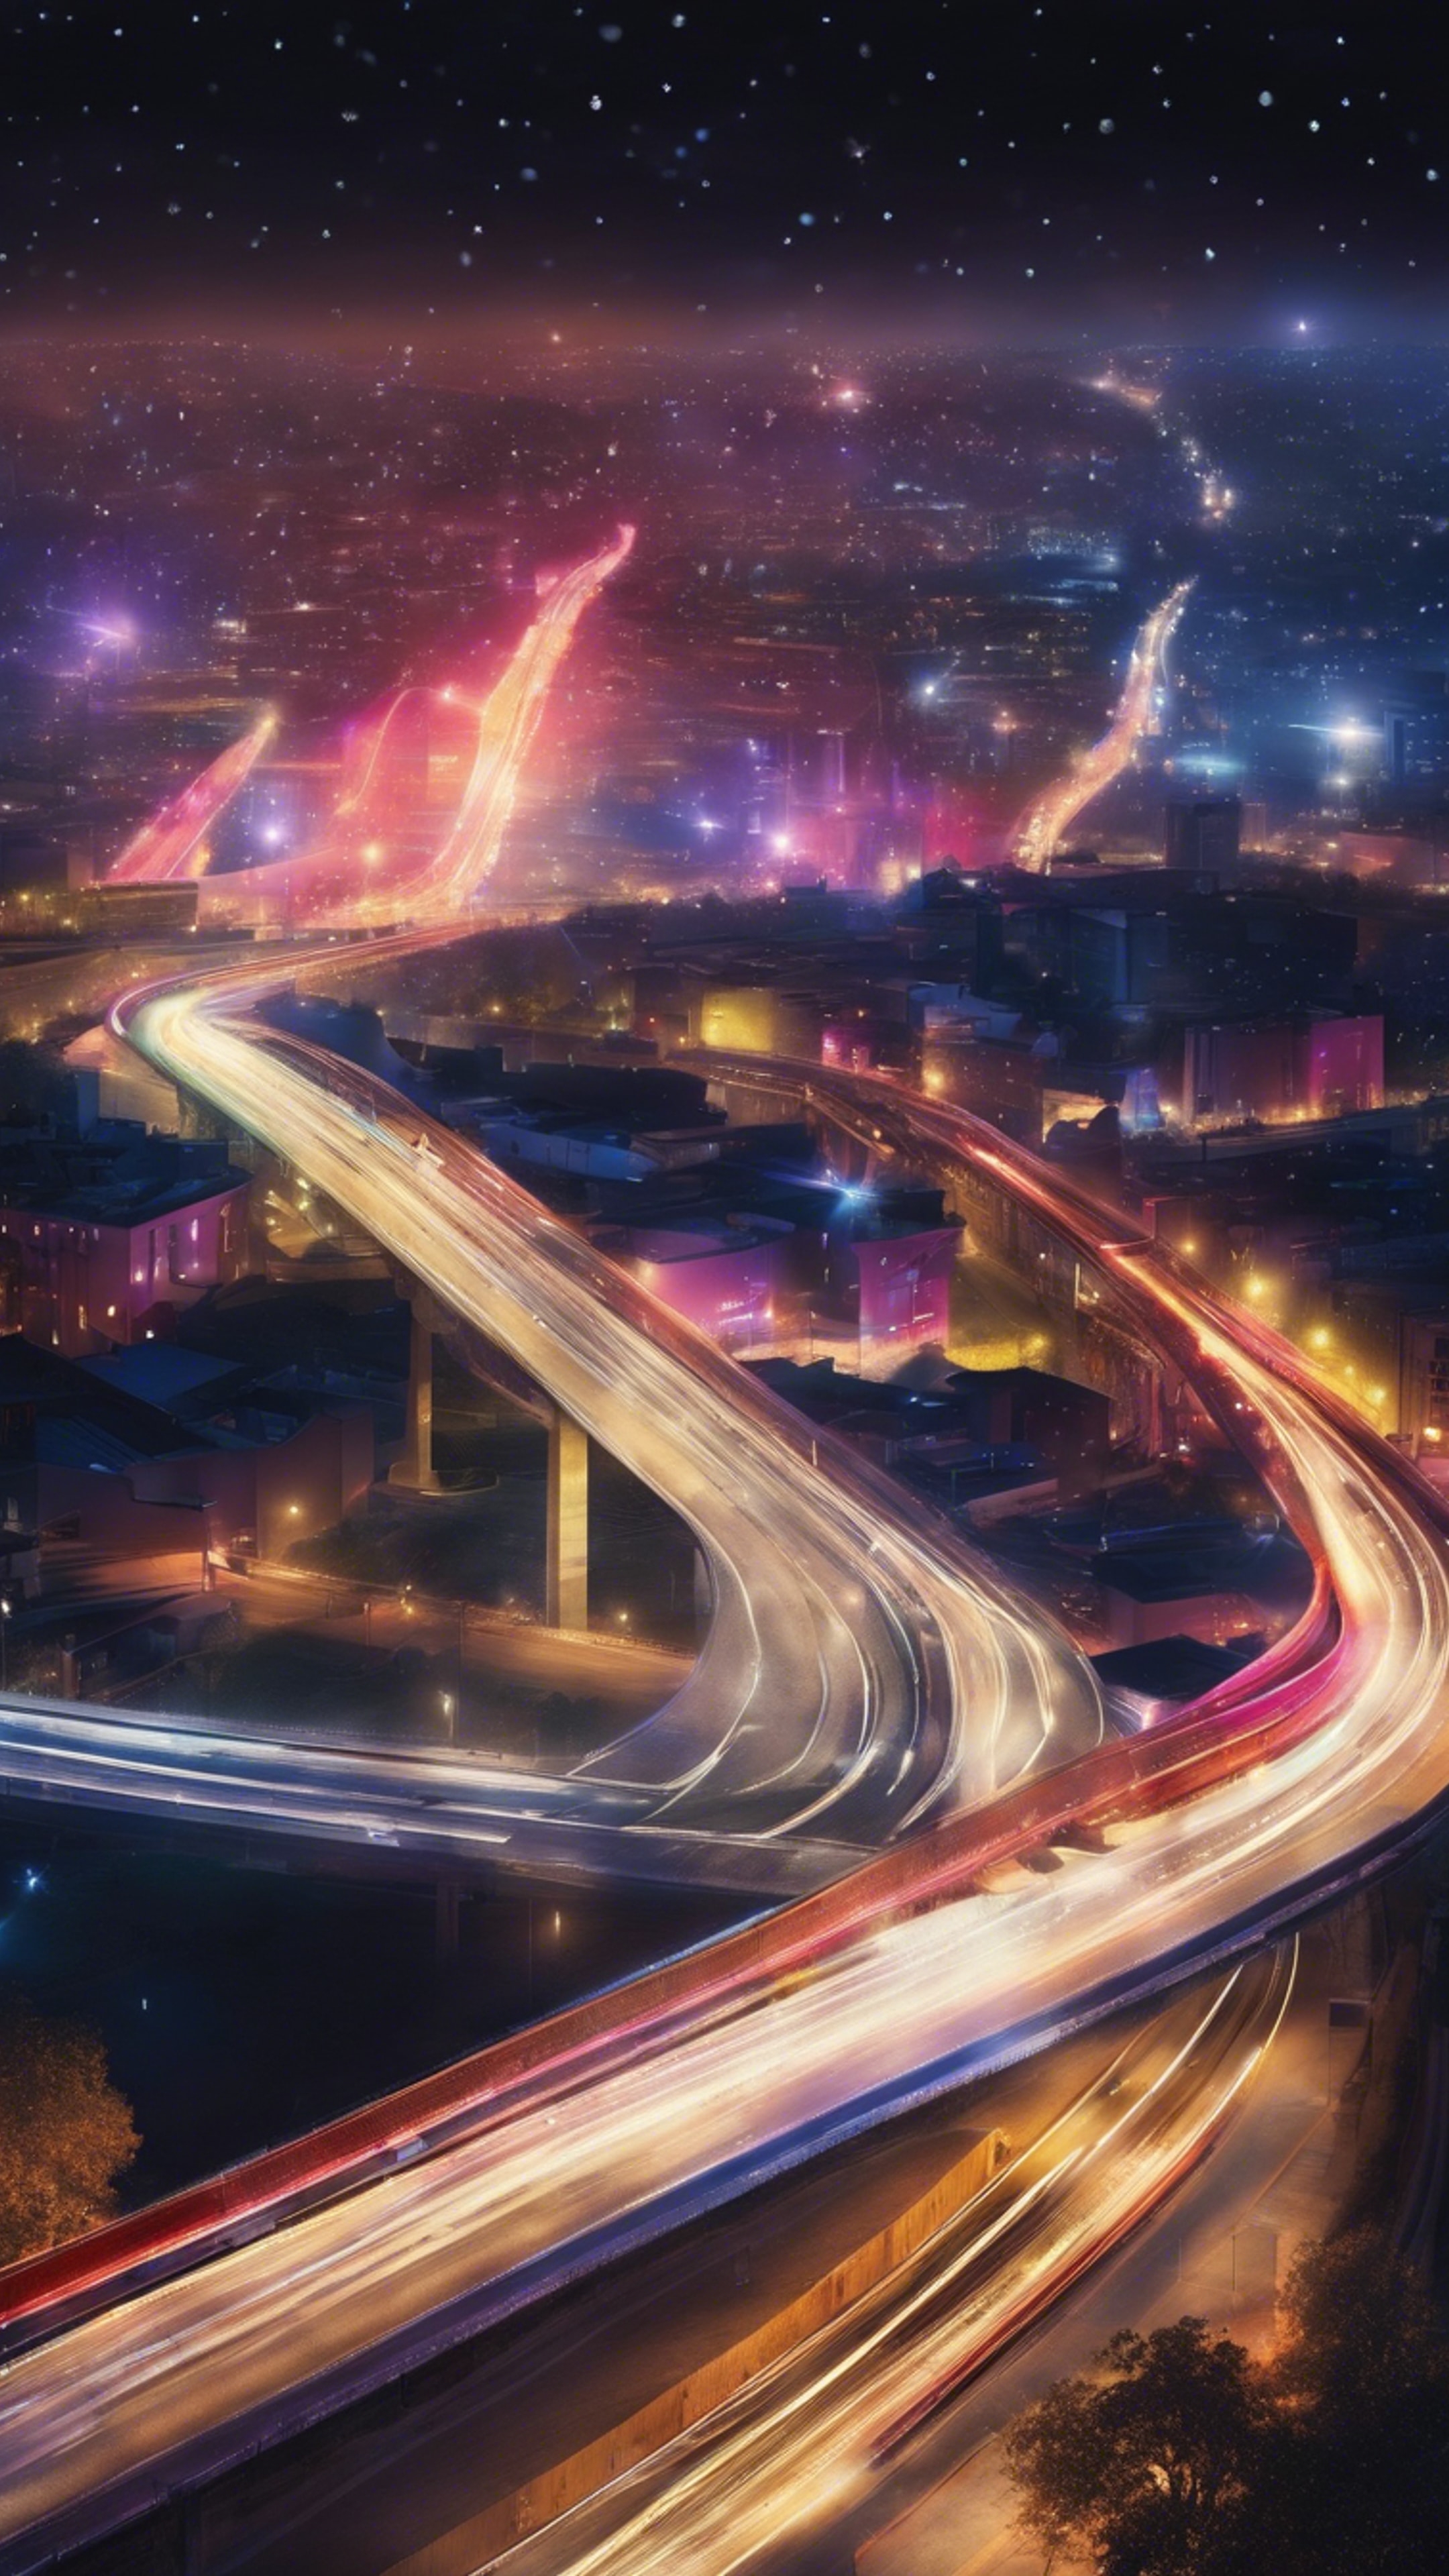 A lustrous highway painting a ribbon of light through the city under the vivid colors of a nocturnal sky. Fondo de pantalla[7f6125f7f59b411d957d]